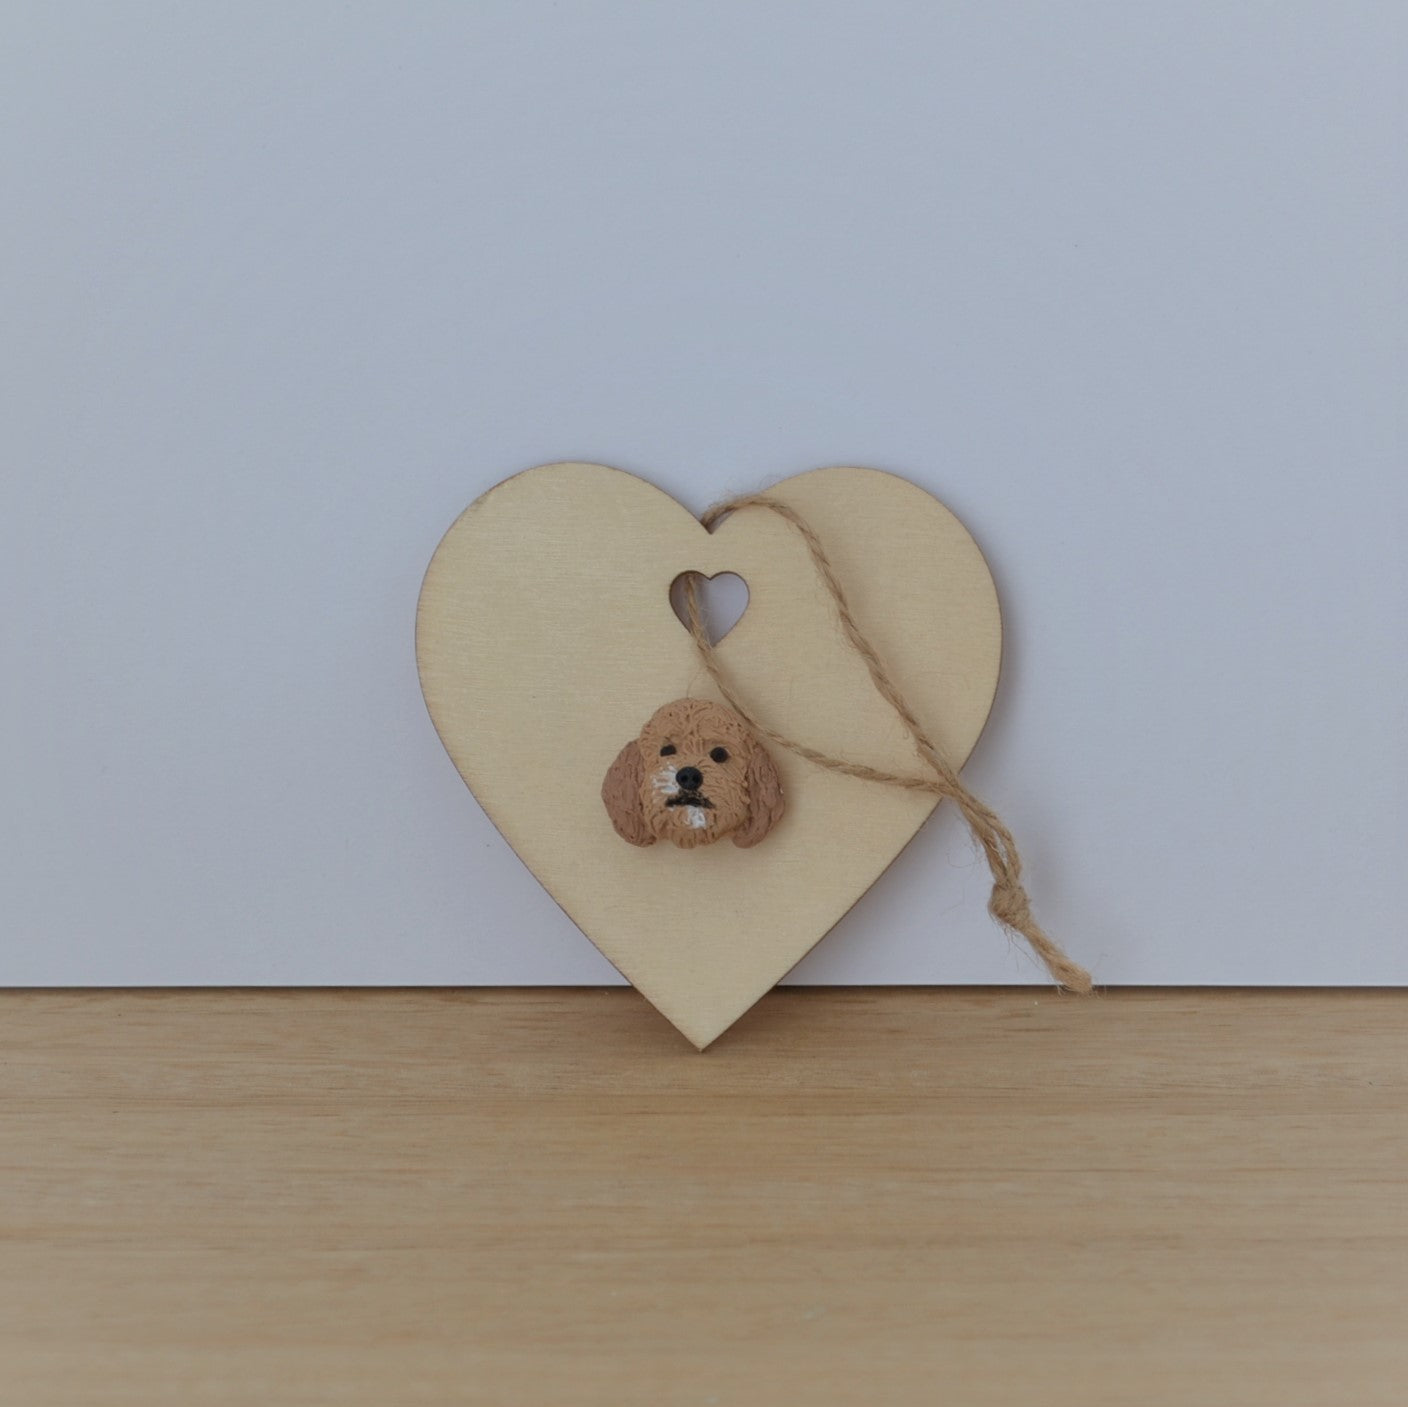 Heart shaped timber Christmas ornament with polymer clay handmade dog face